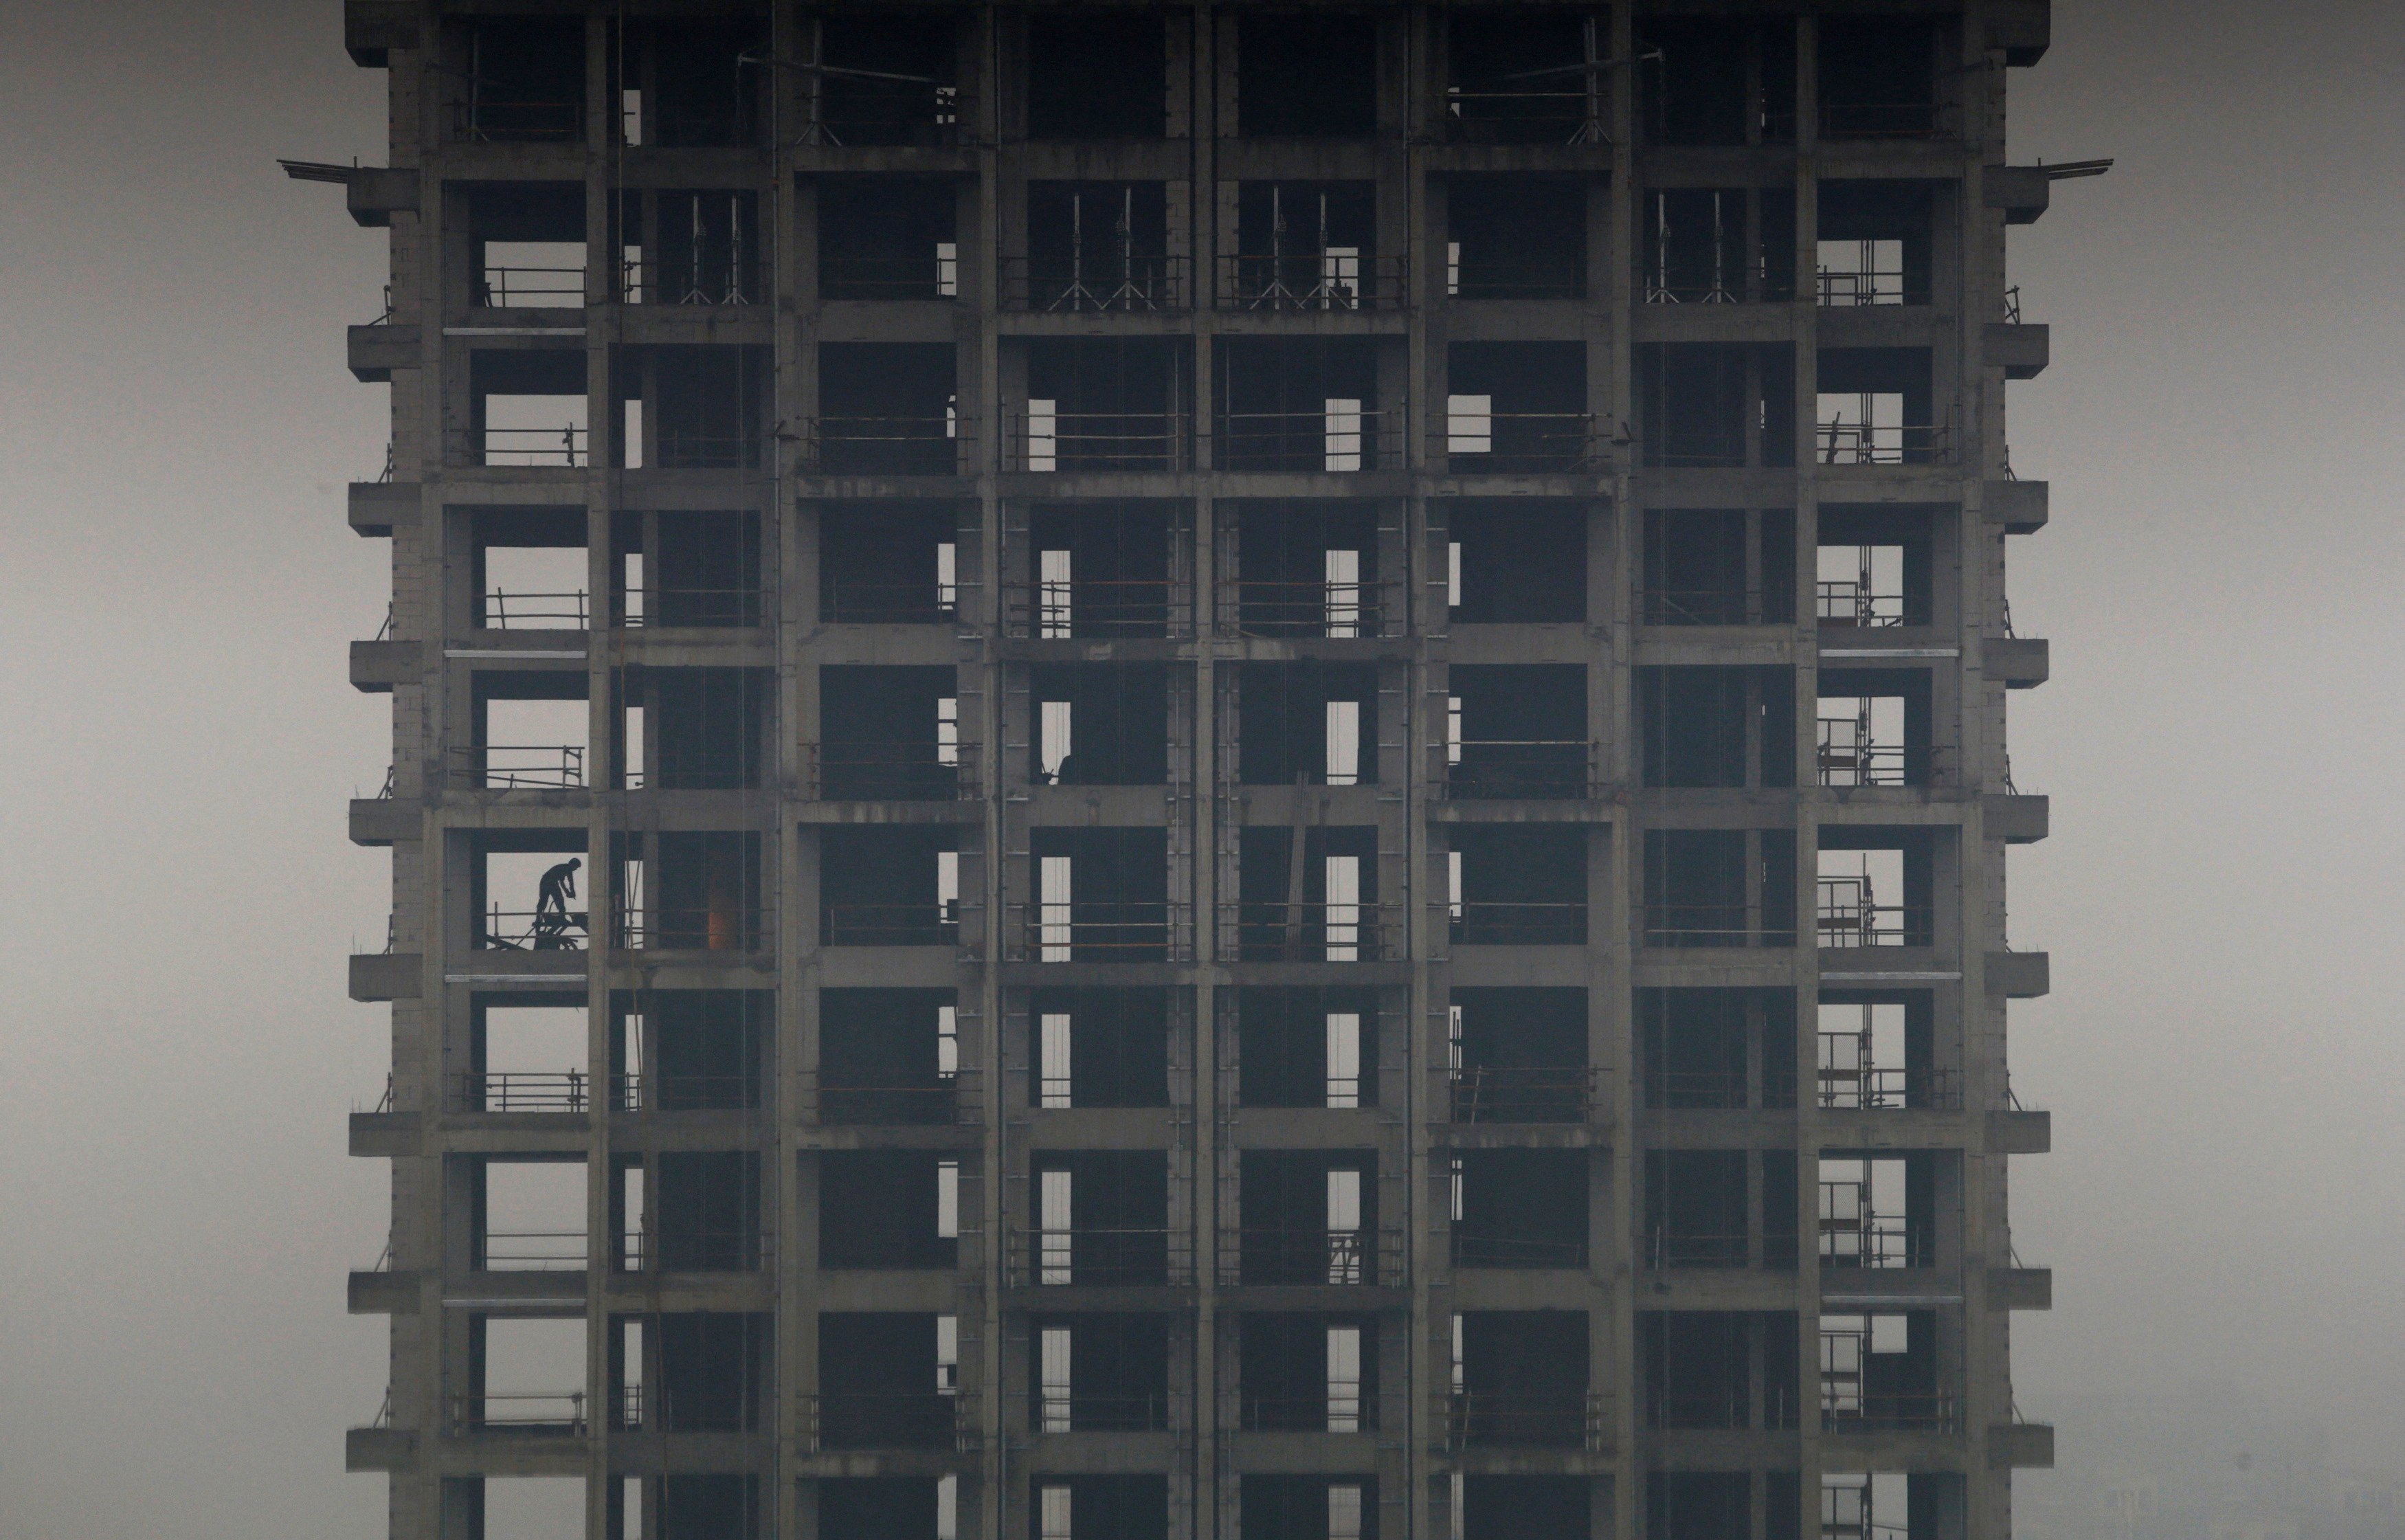 A labourer works on a construction site of a residential building during a hazy day in Hangzhou